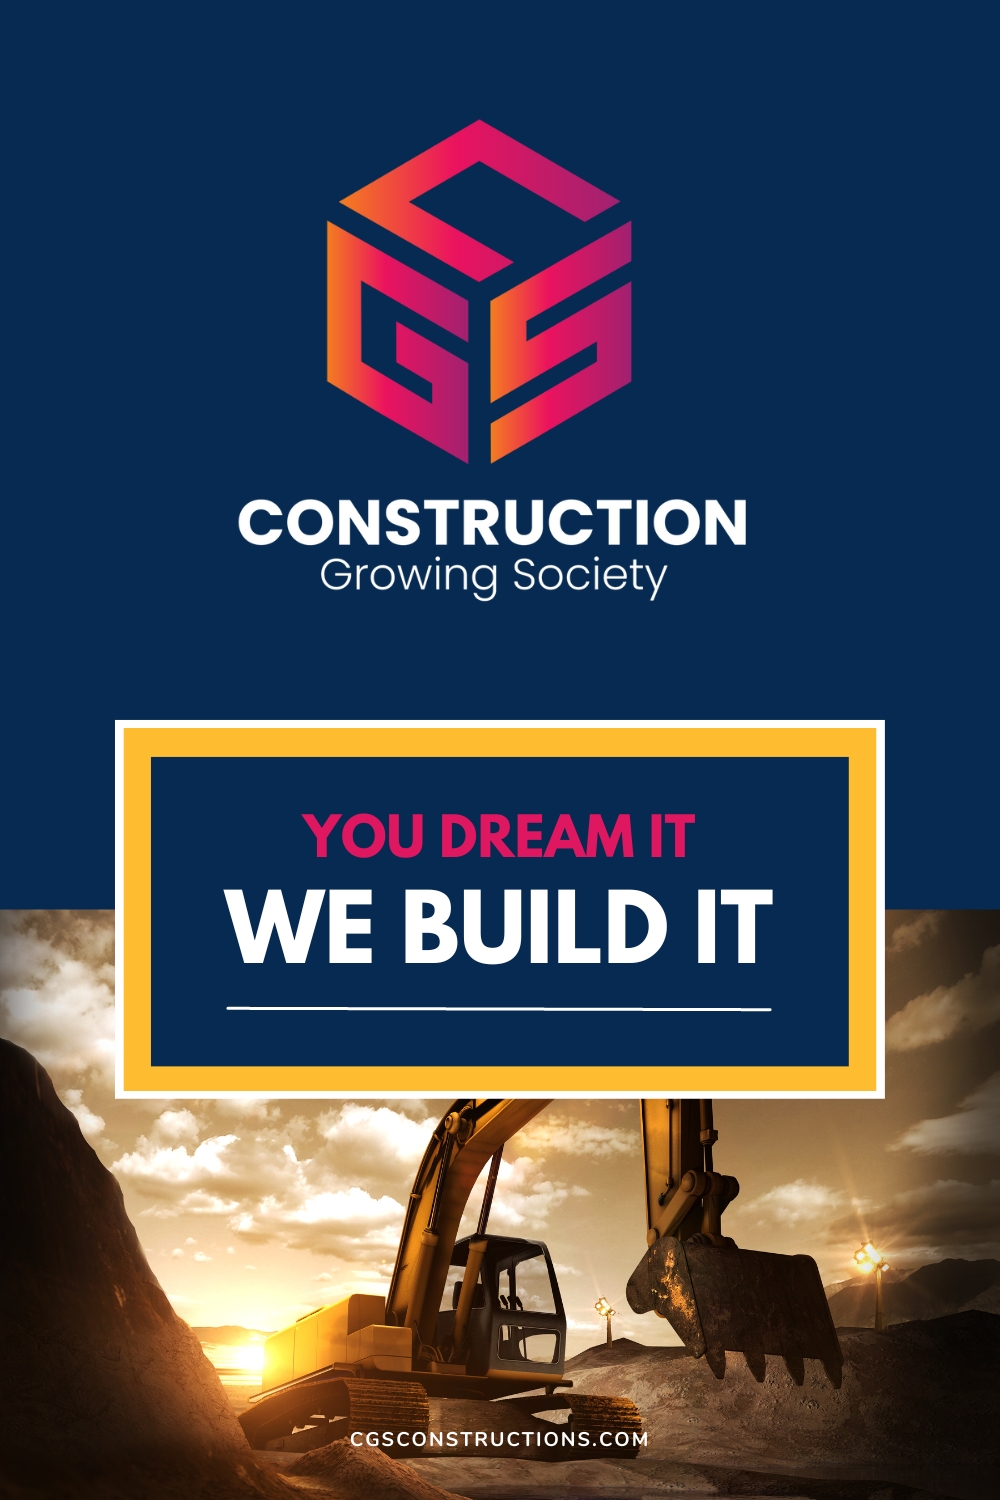 CGS (Construction Growing Society) Construction logo-Only $7 pinterest preview image.